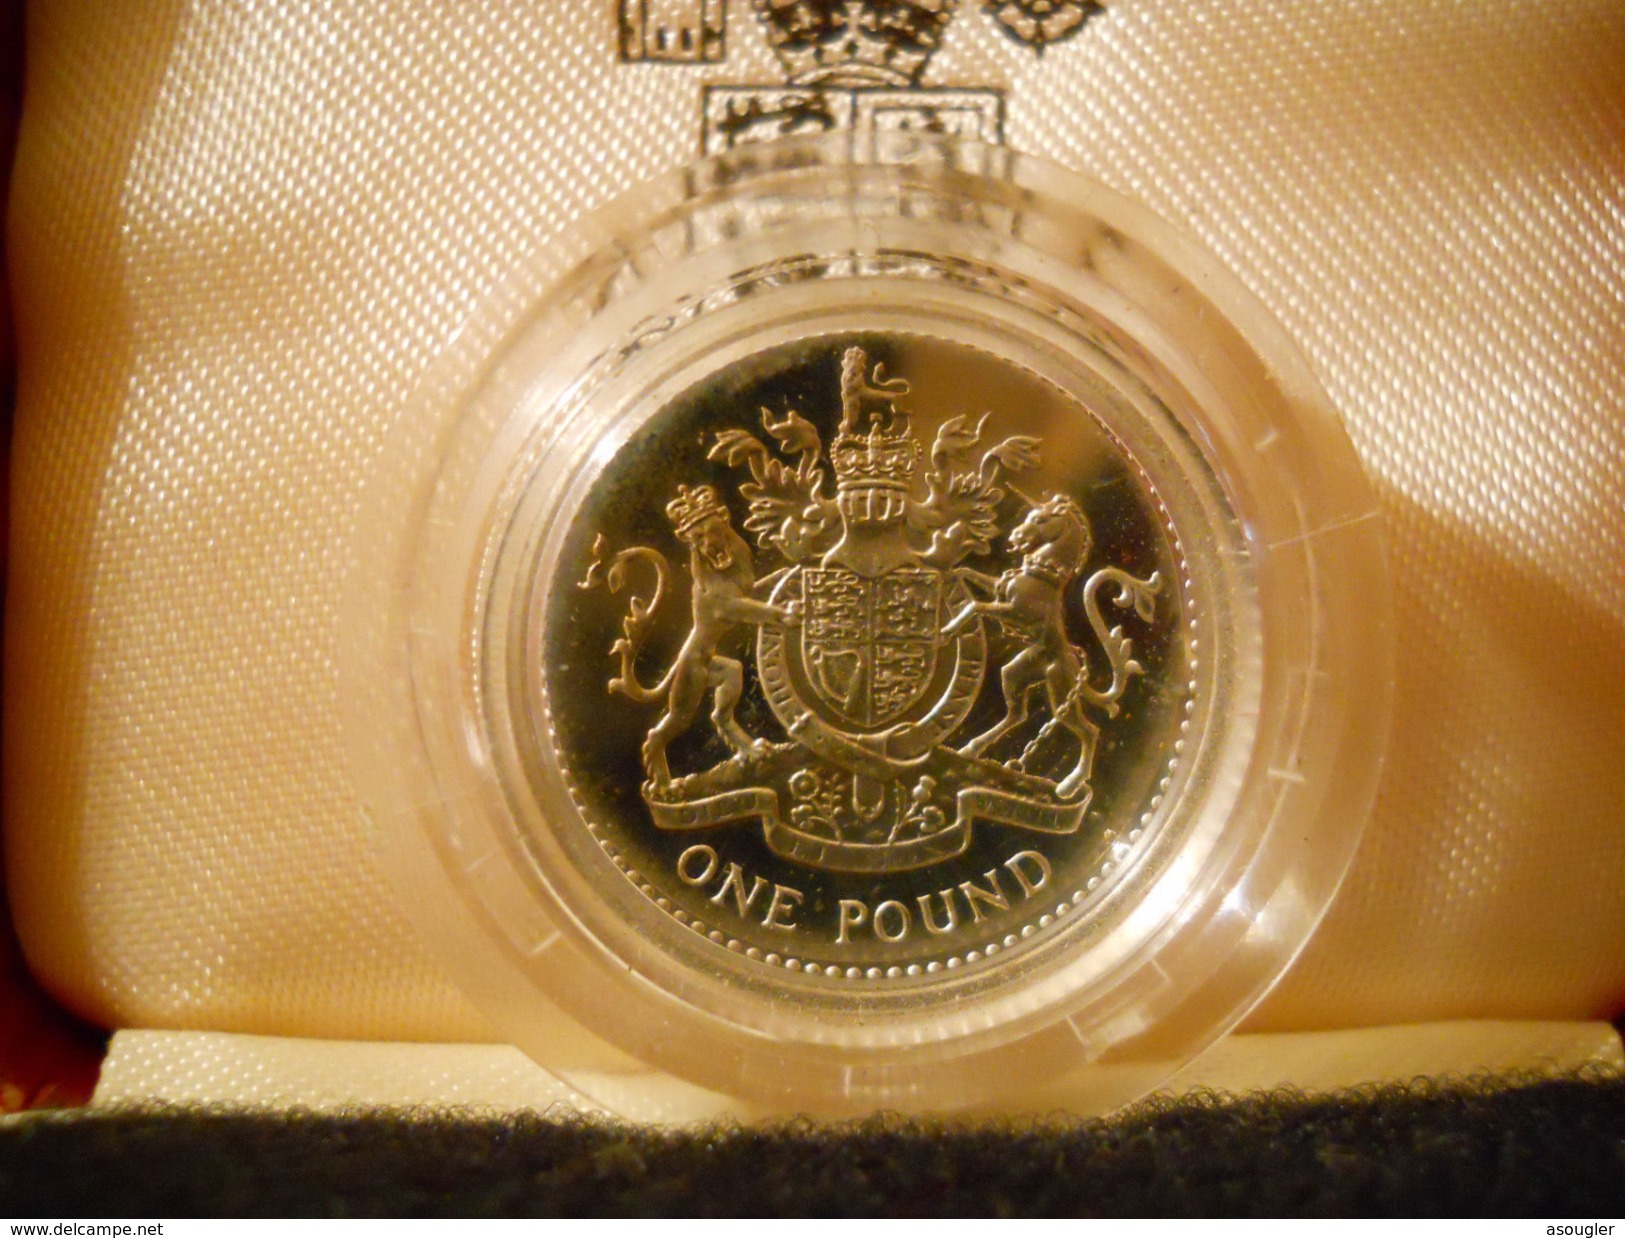 GREAT BRITAIN UK ENGLAND 1 POUND 1983 SILVER PROOF - 1 Pond